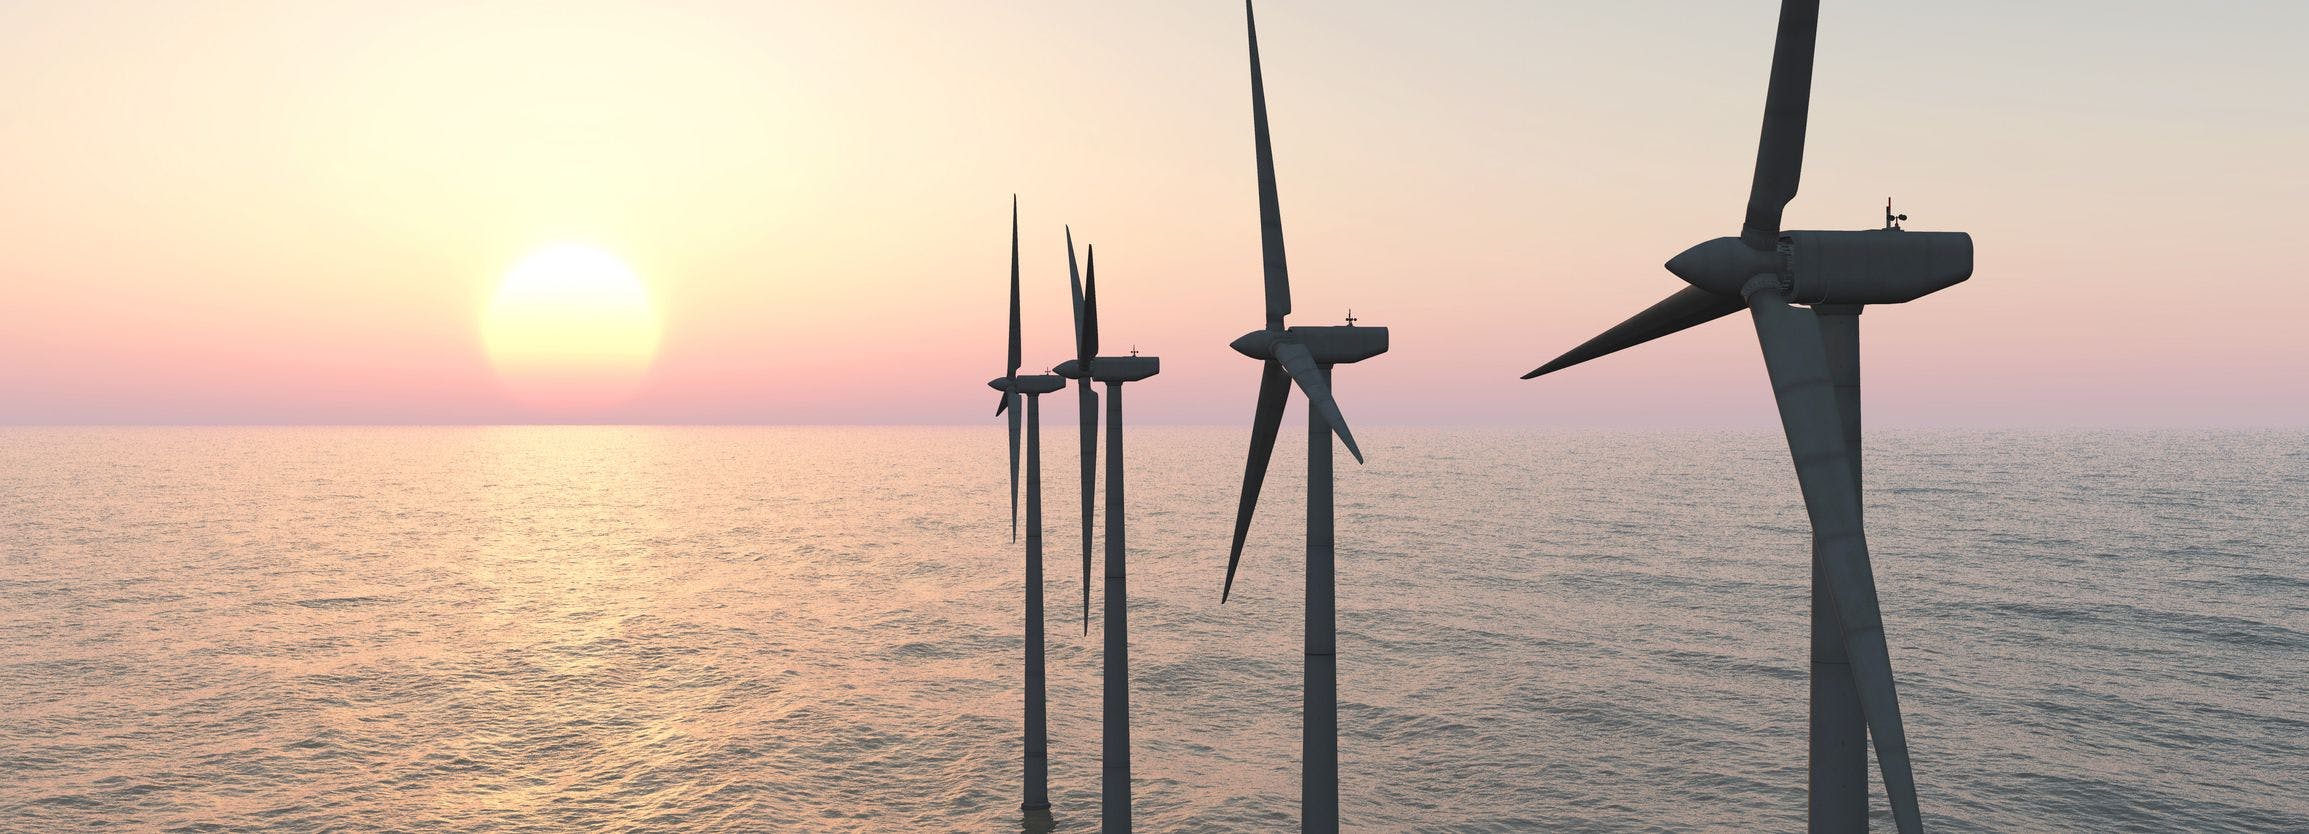 Can offshore wind leaders scale up supply to deliver on net zero?